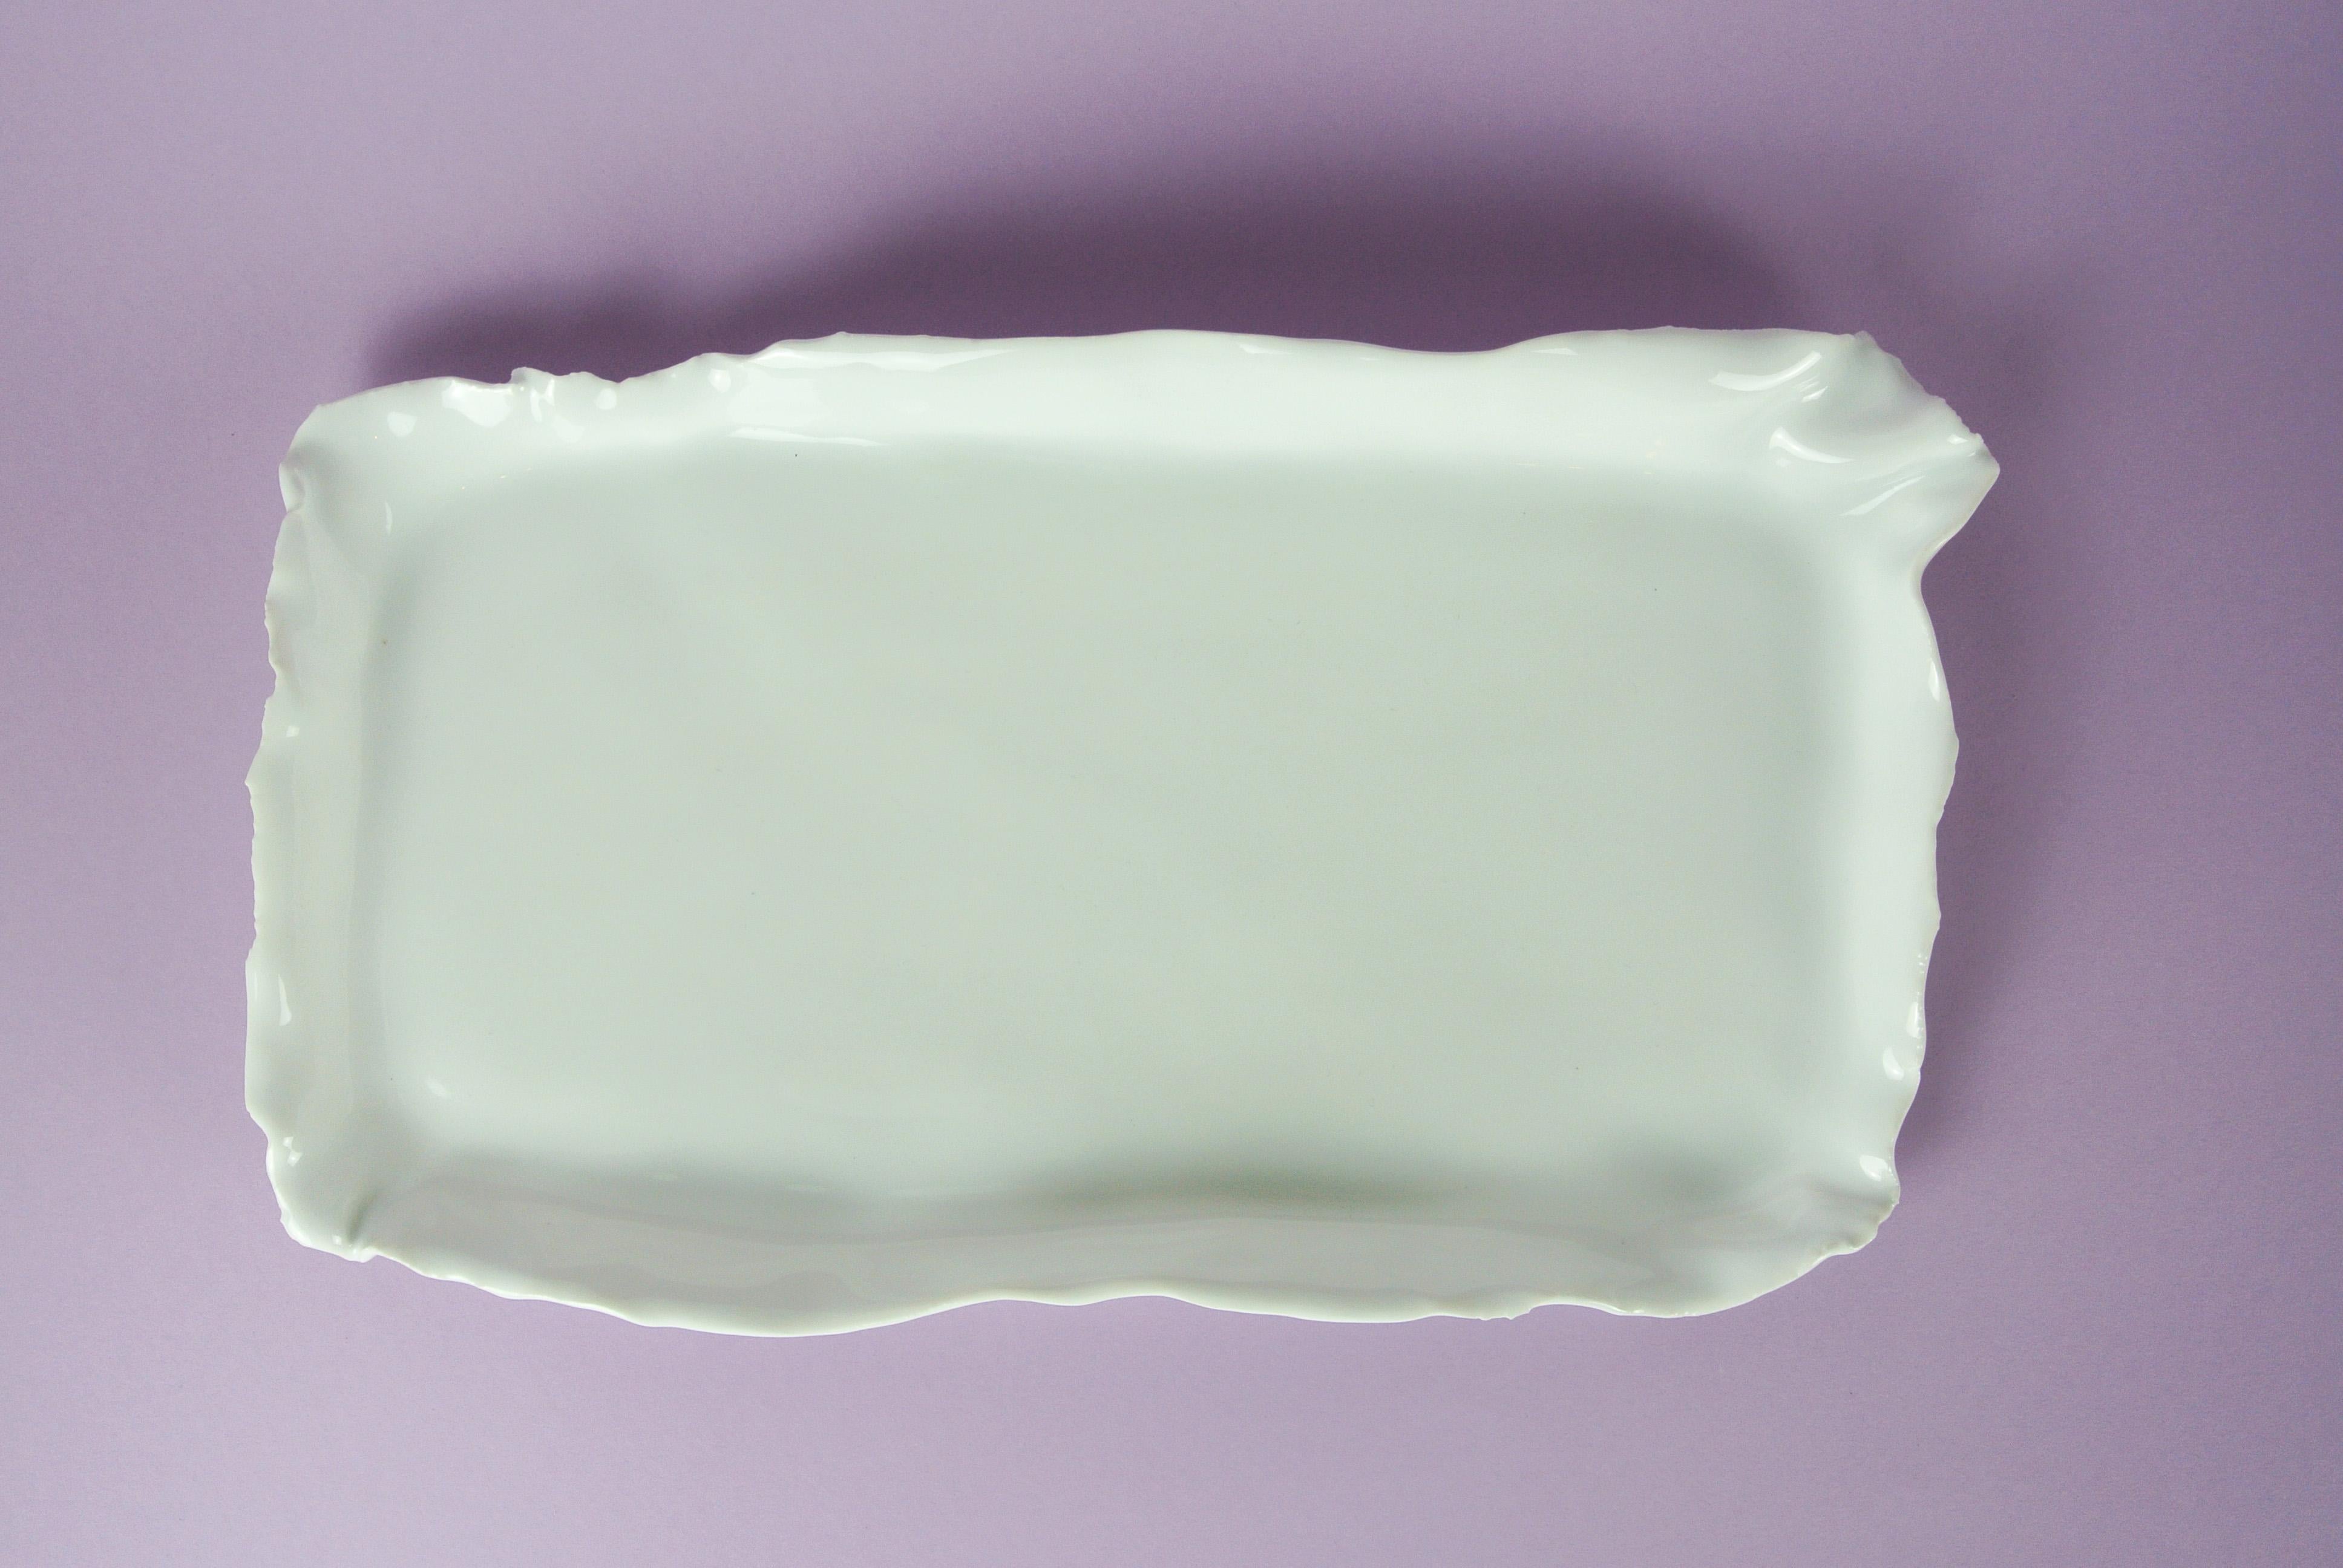 Hand-Crafted Thin Porcelain Tray with White Glossy Glaze